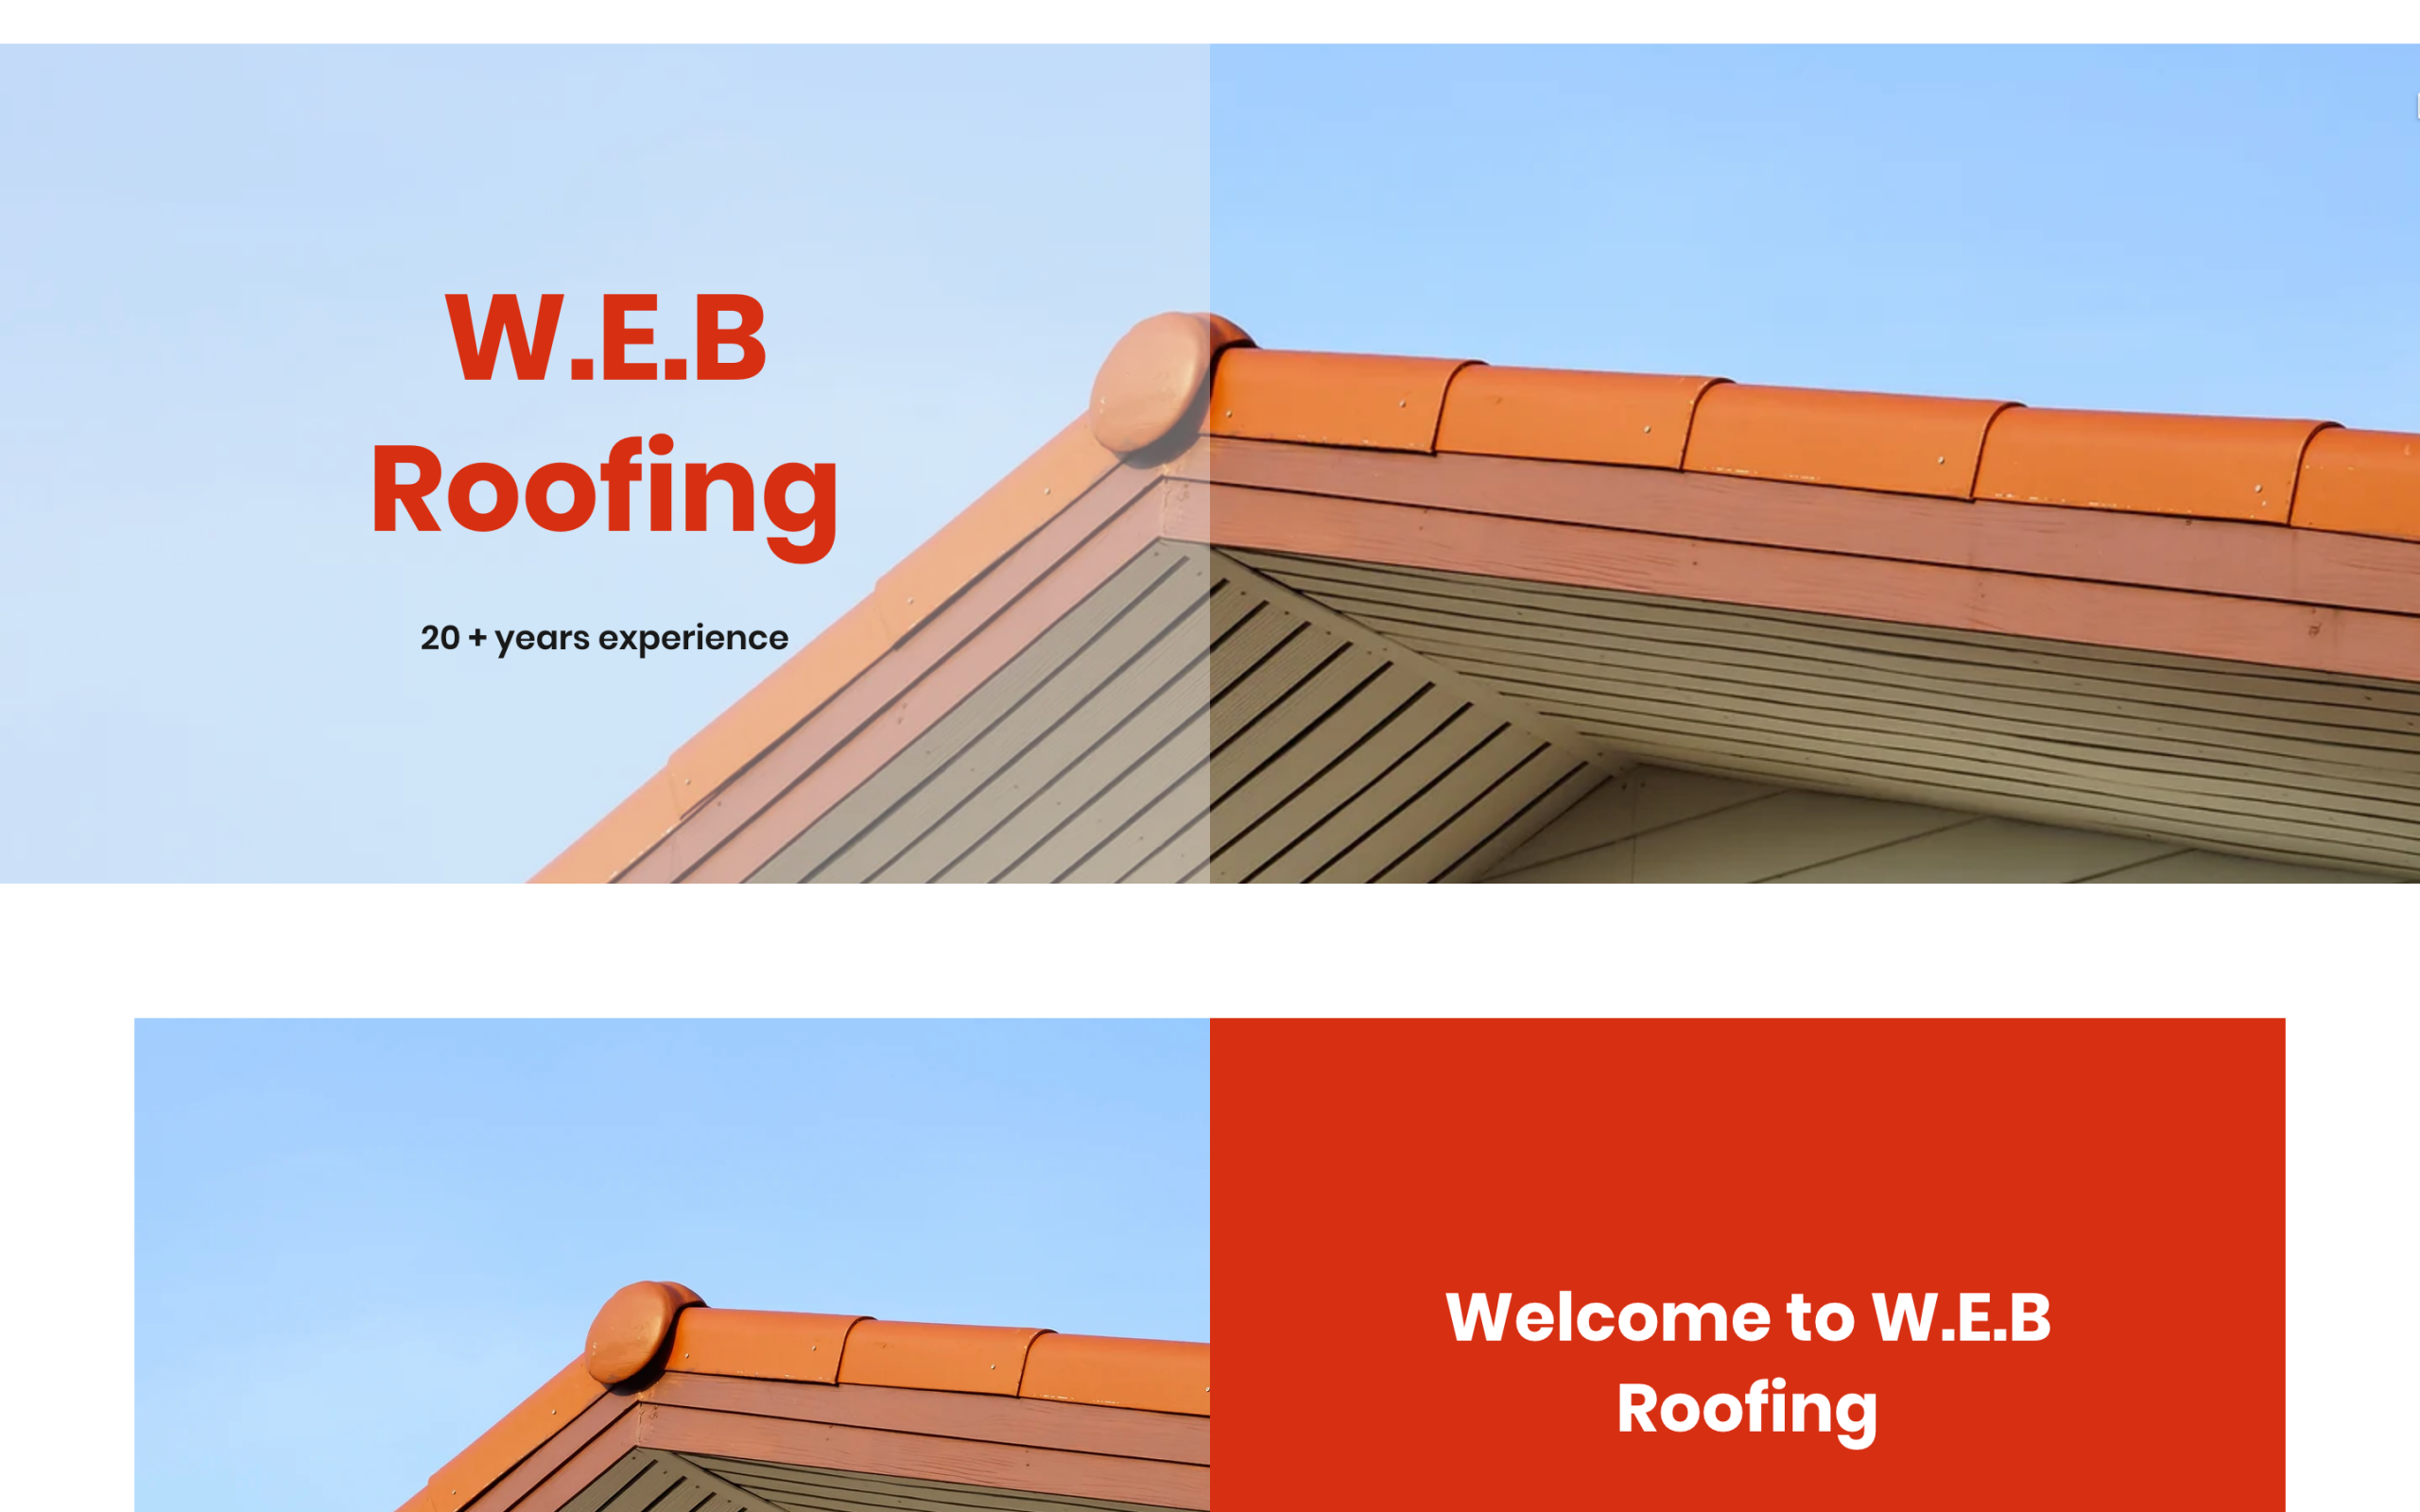 WEB Roofing - The Highest Quality Service at Competitive Prices